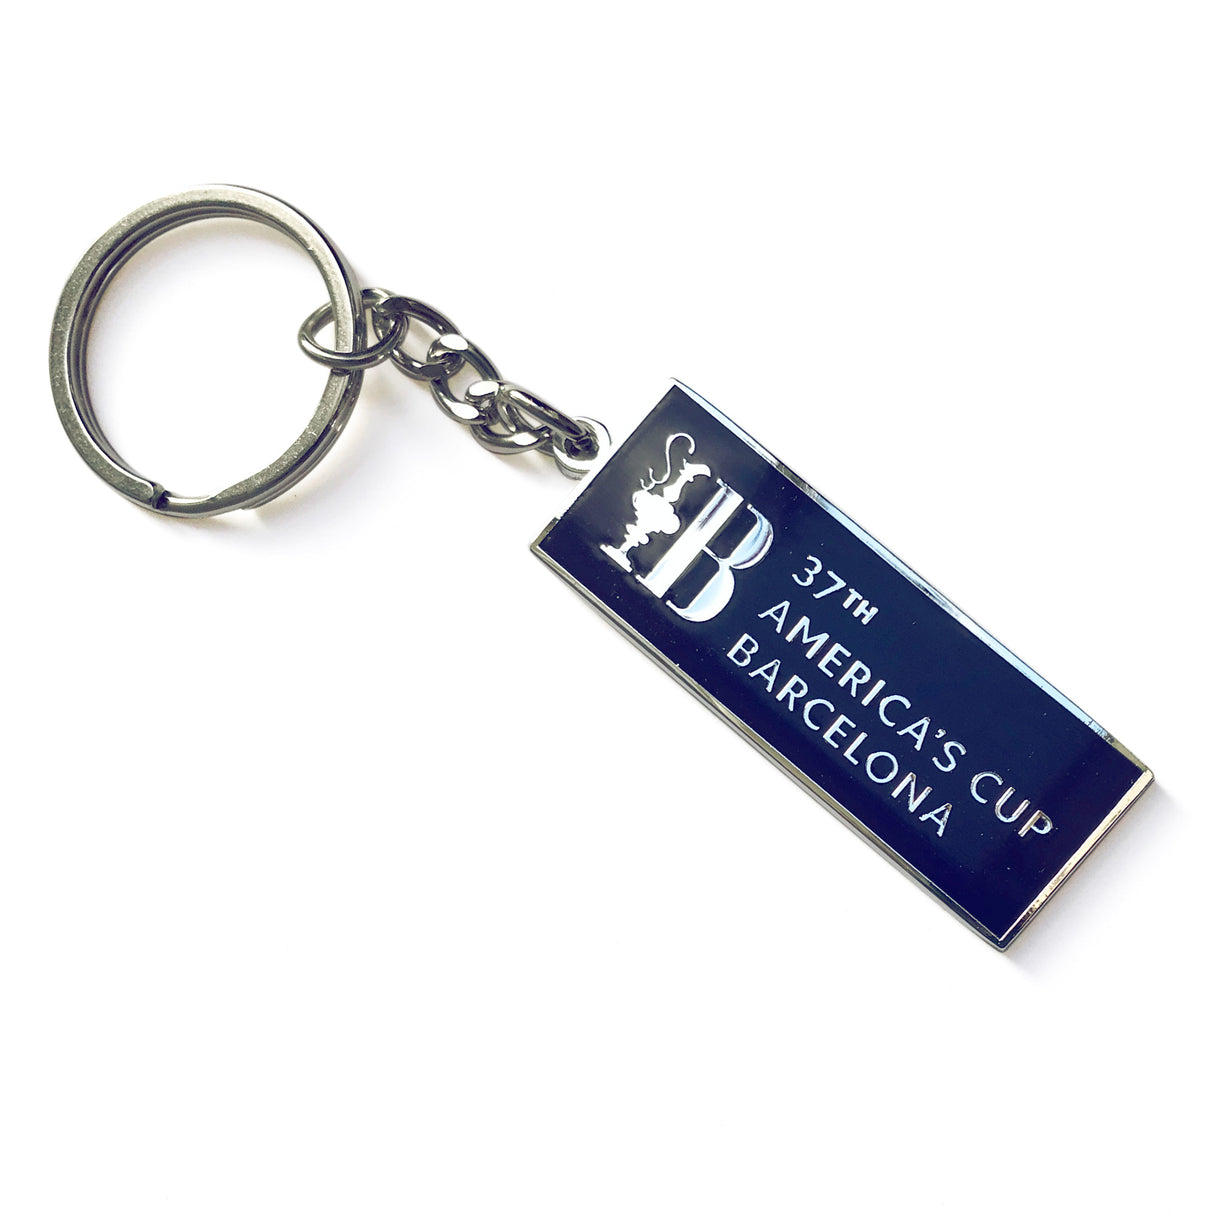 37th America's Cup Text Key Ring